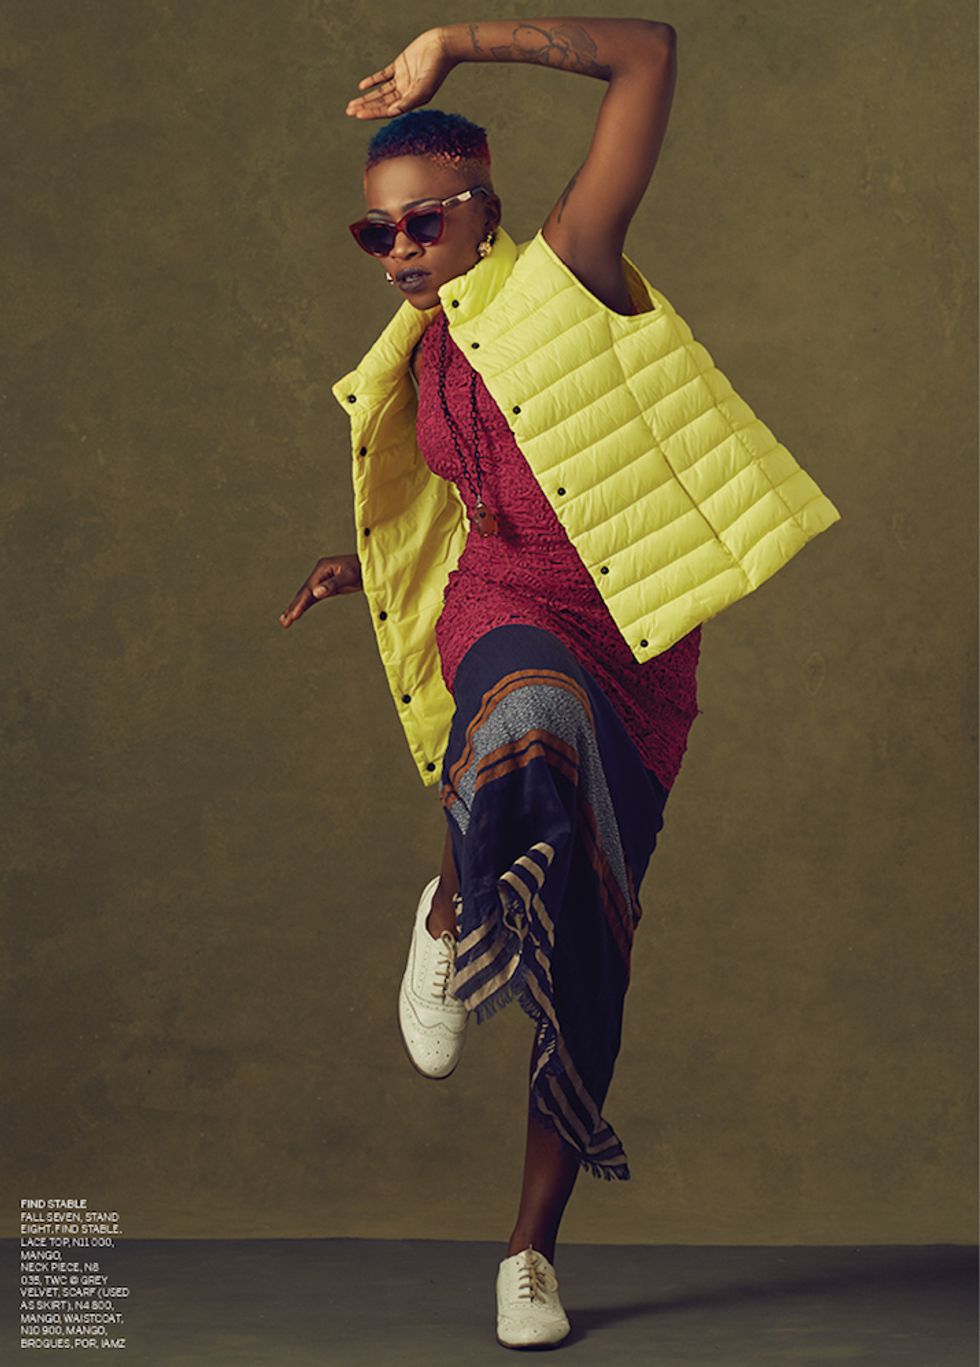 London Fly Girl Aina More Kills It In This Nigerian Fashion Editorial